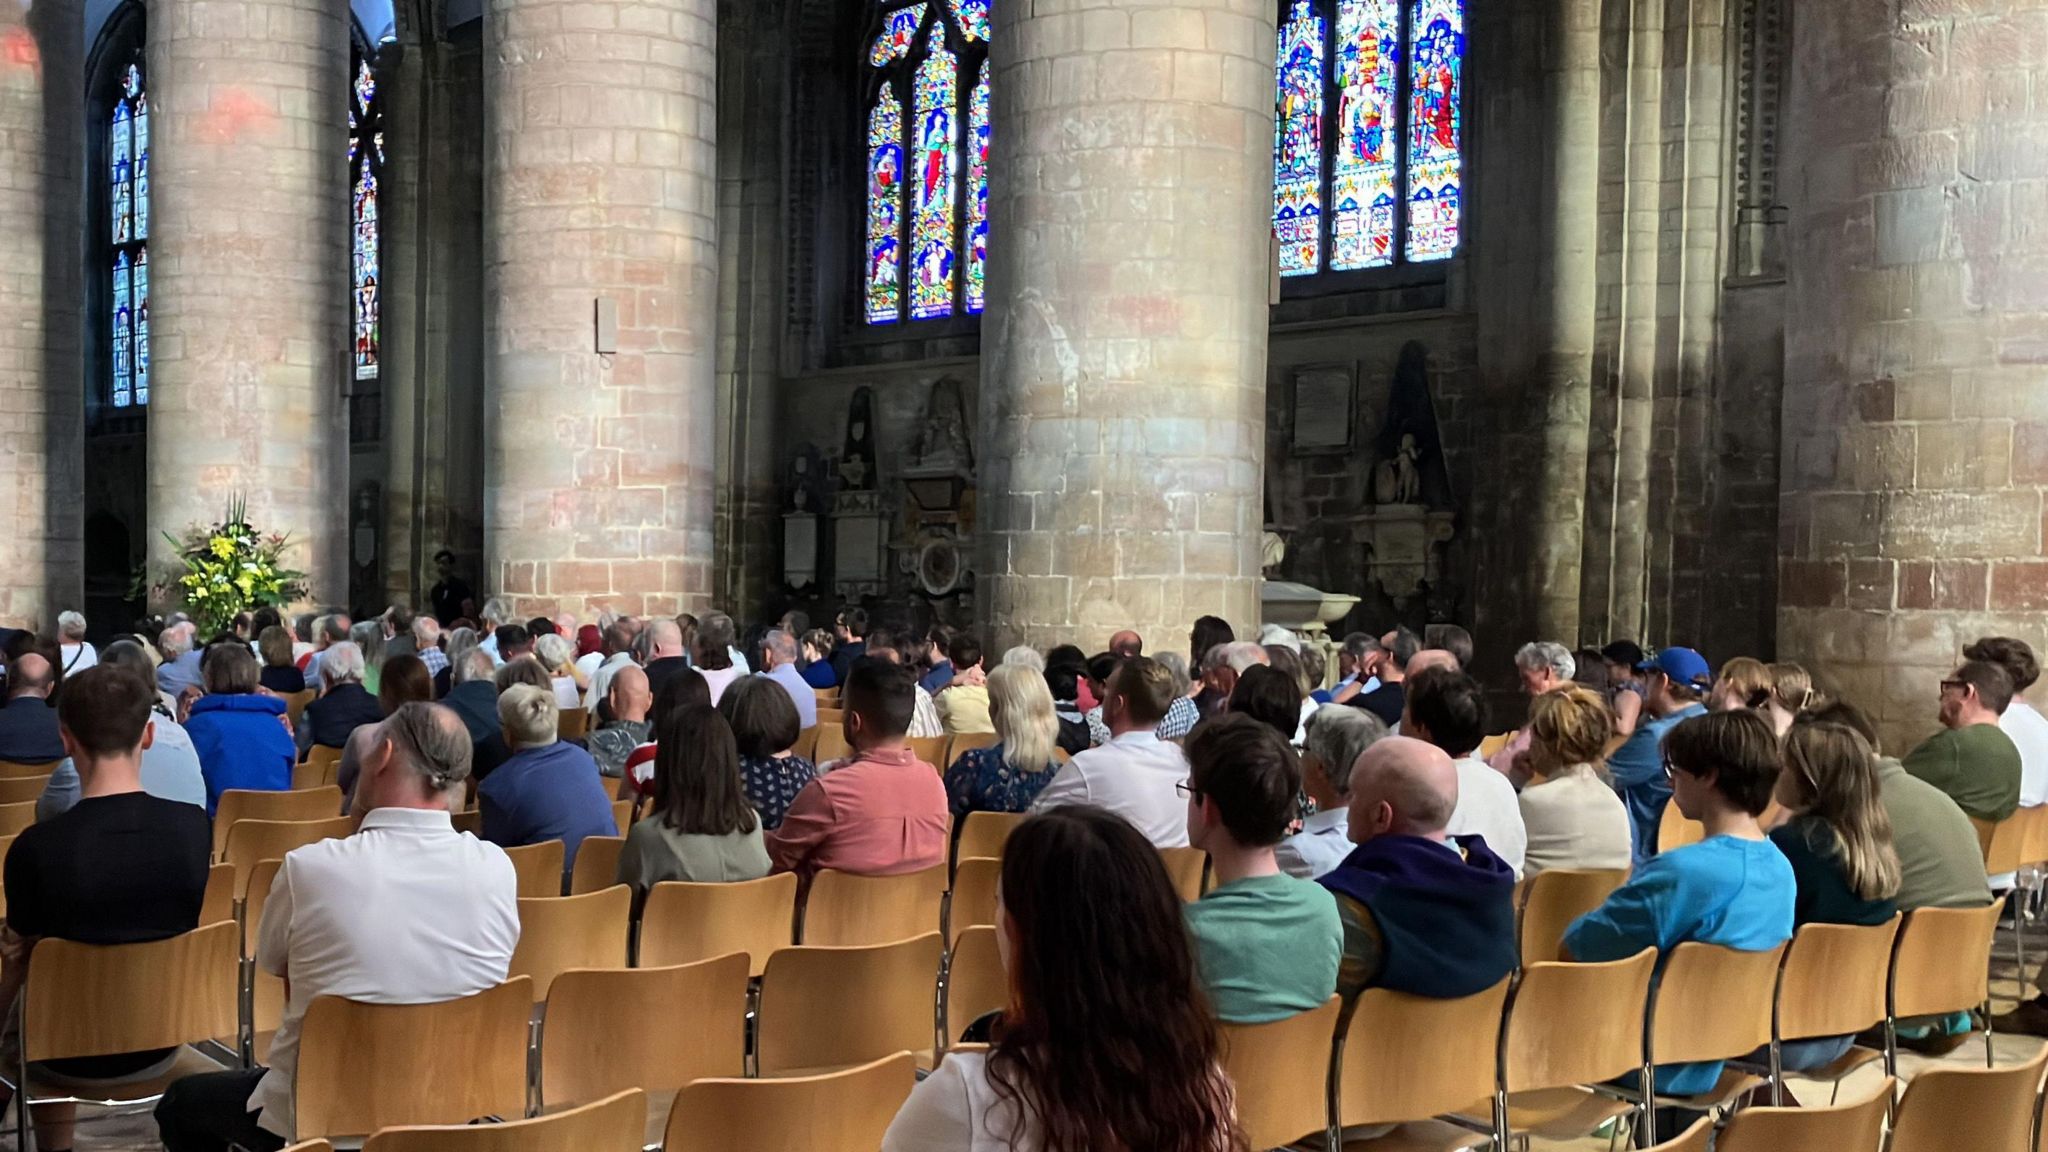 People sat on wooden chairs inside Gloucester Cathedral listening to candidates at the hustings